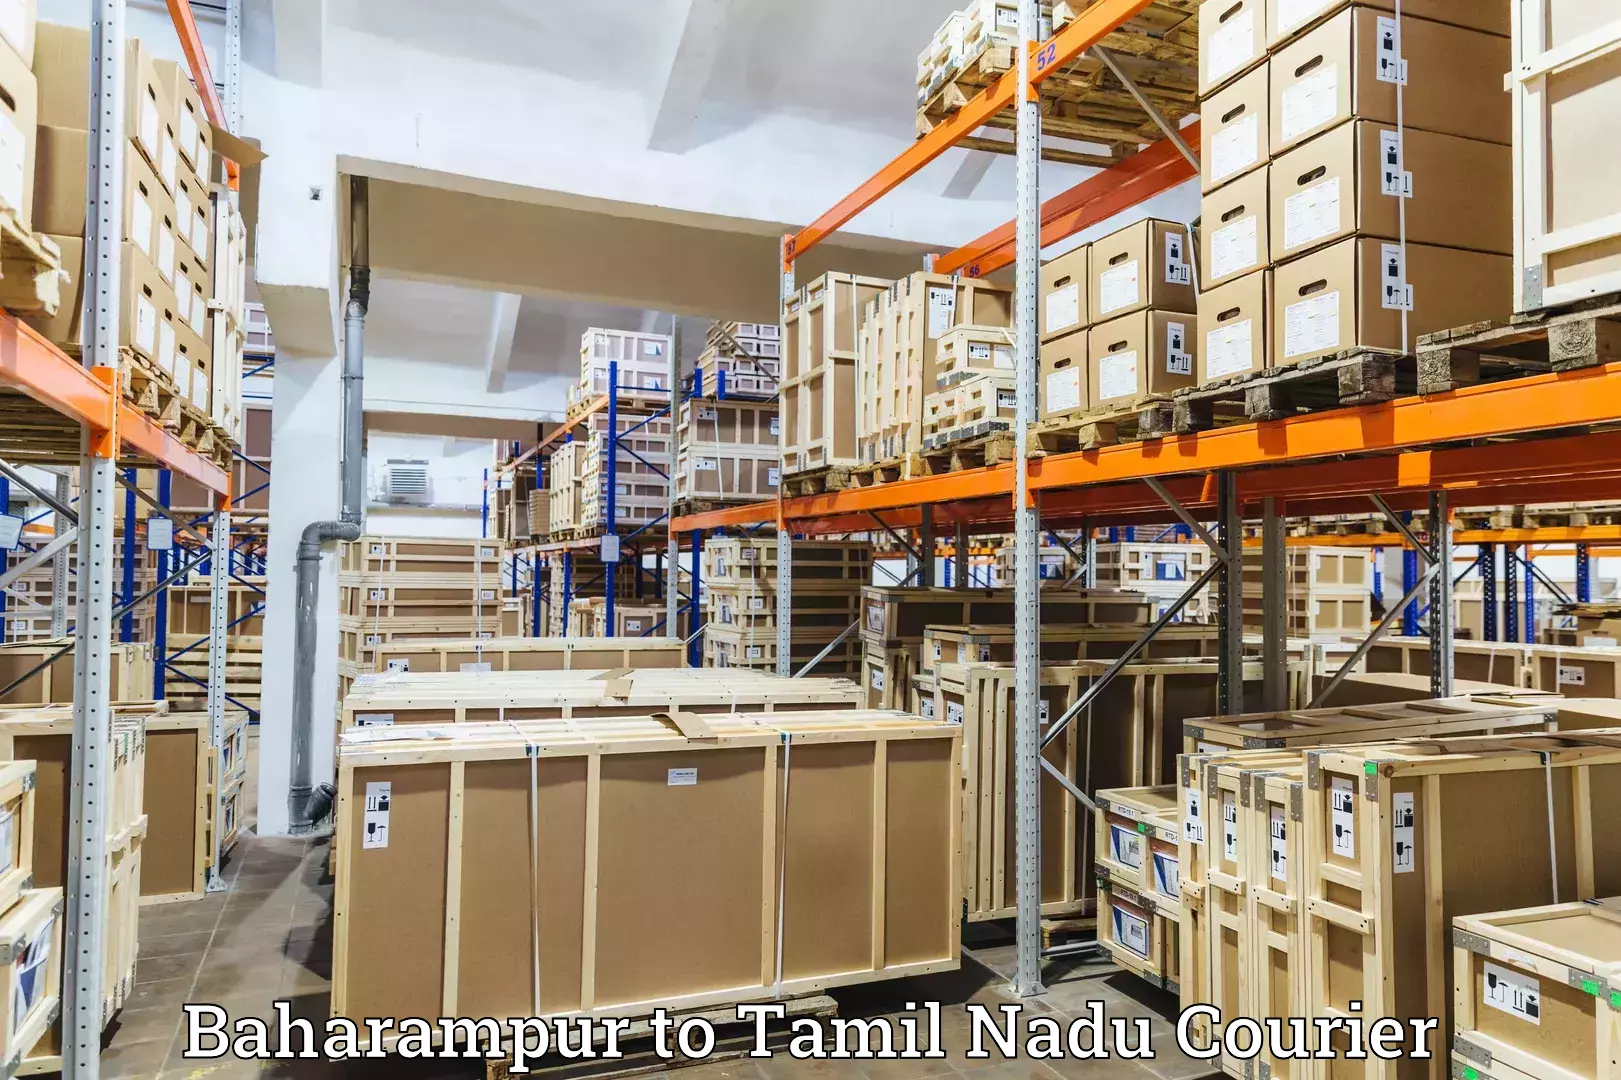 User-friendly delivery service Baharampur to Tamil Nadu